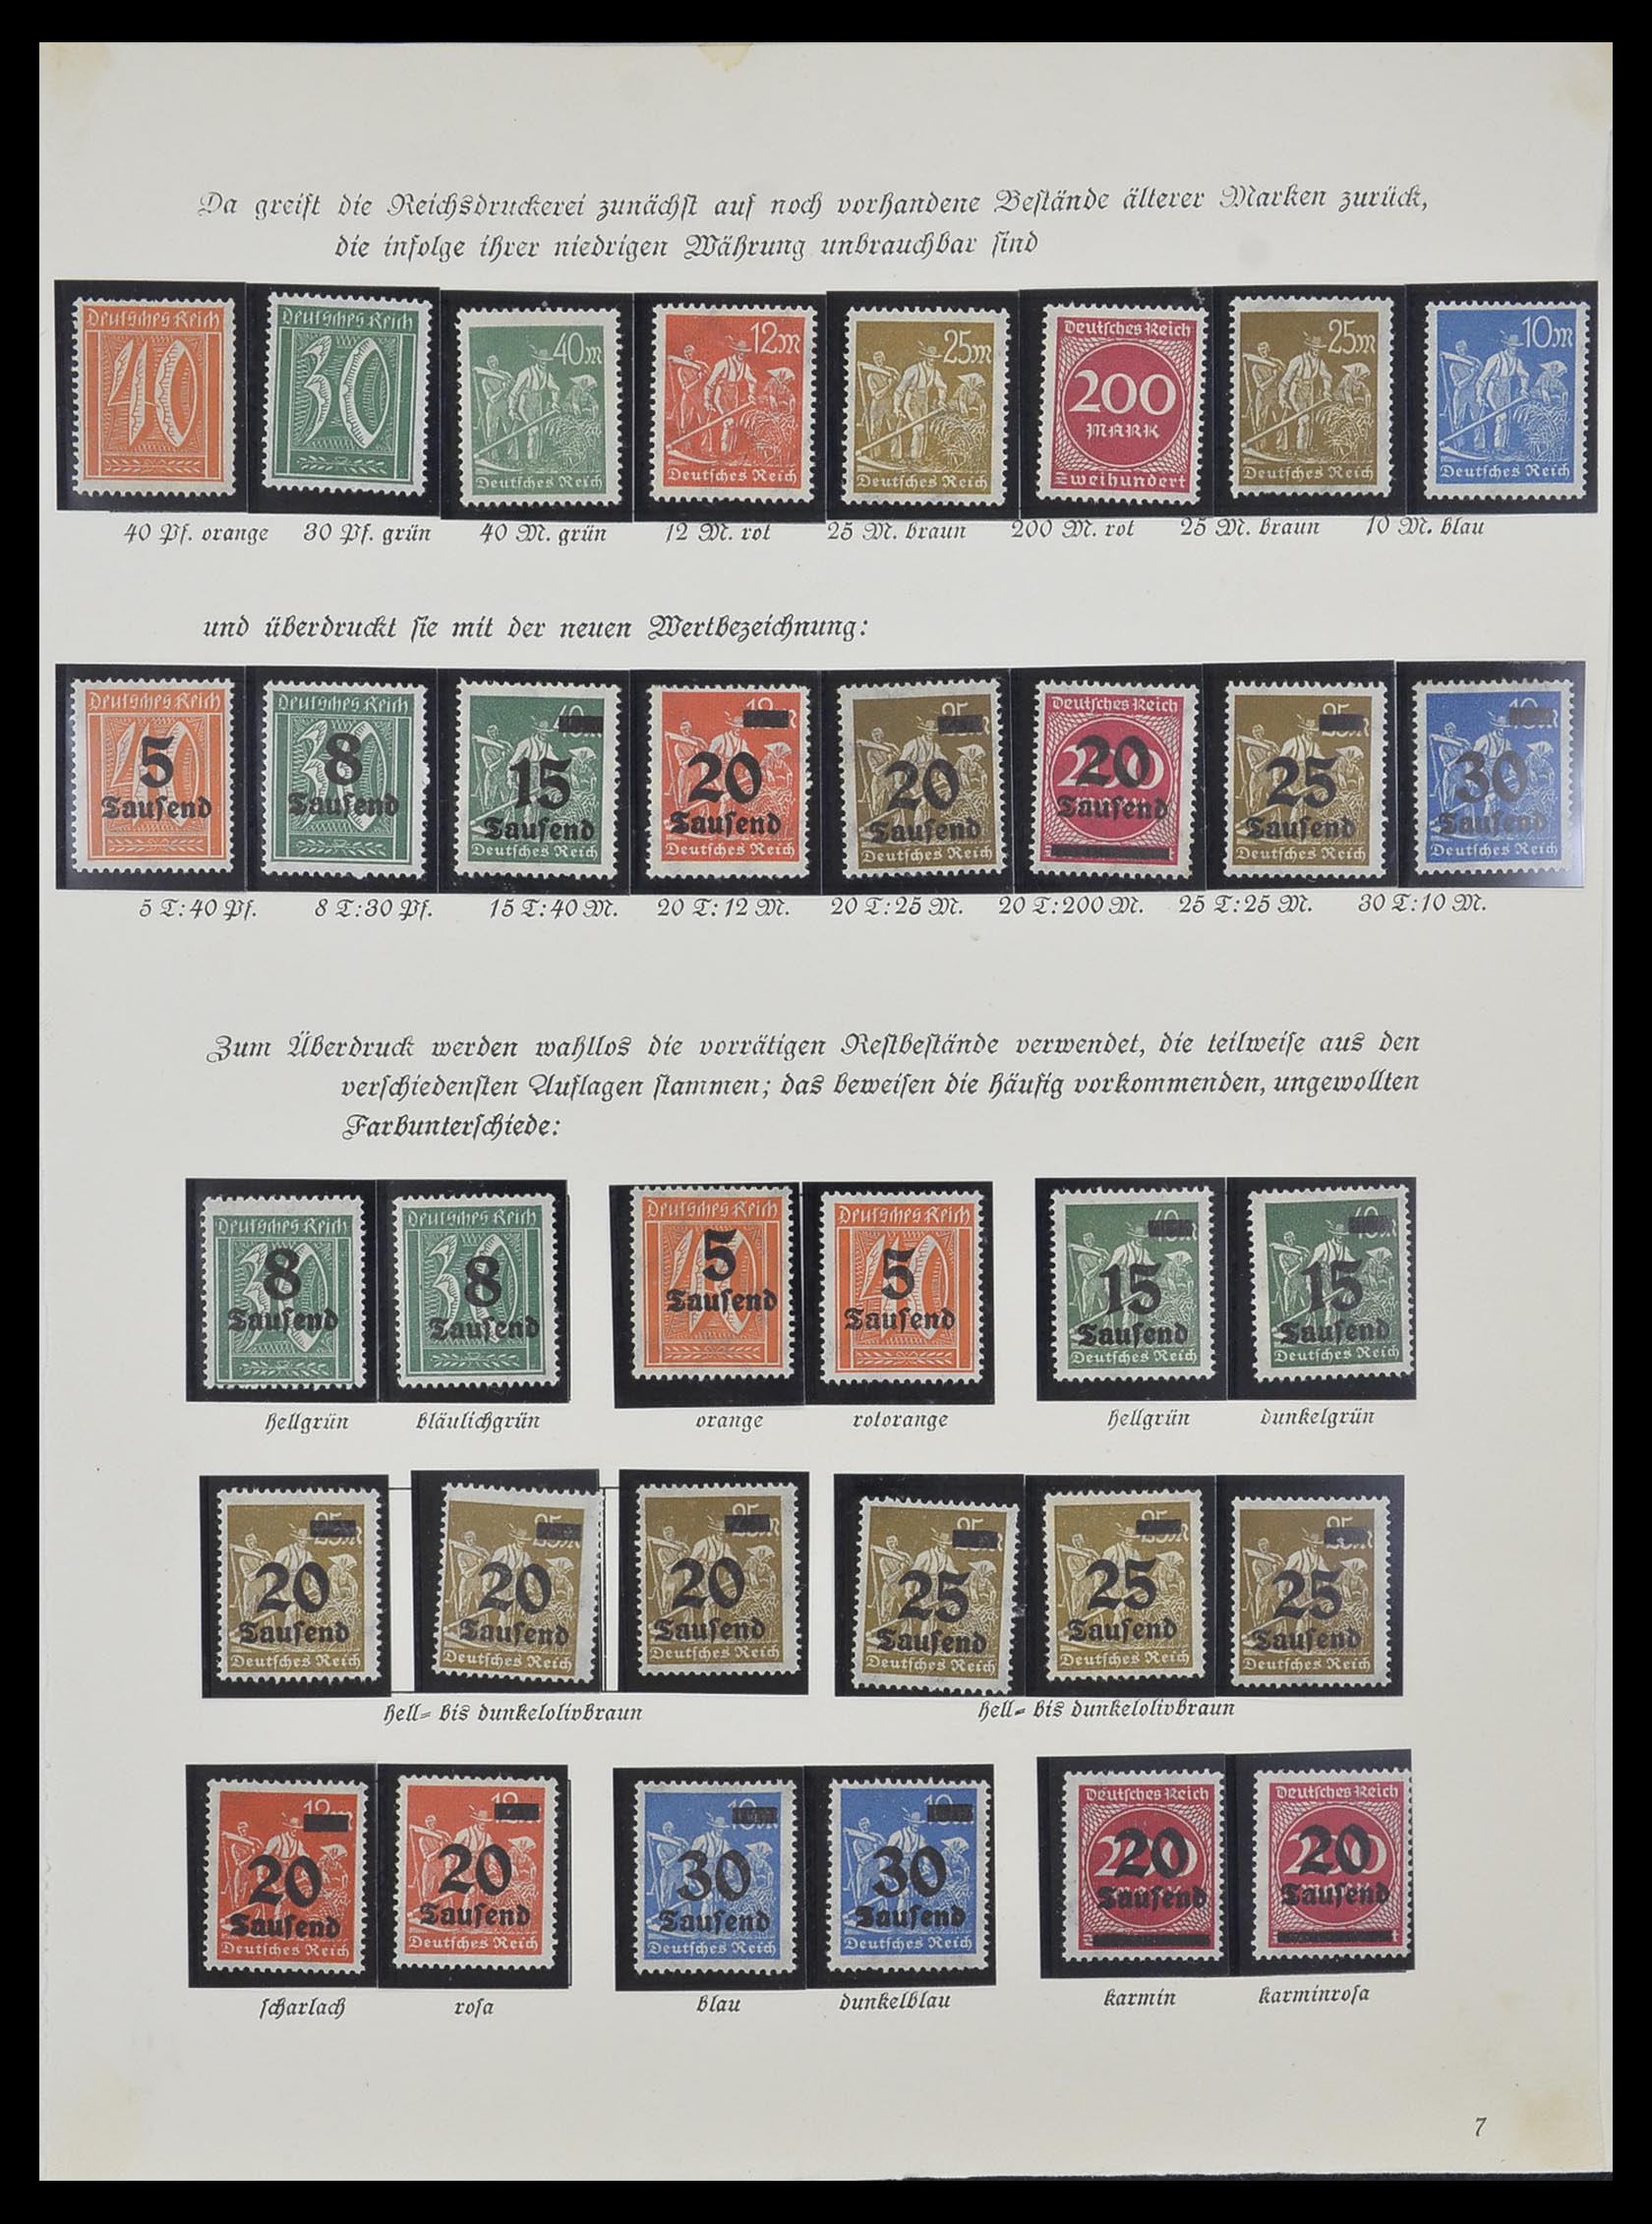 33957 002 - Stamp collection 33957 German Reich infla 1923.